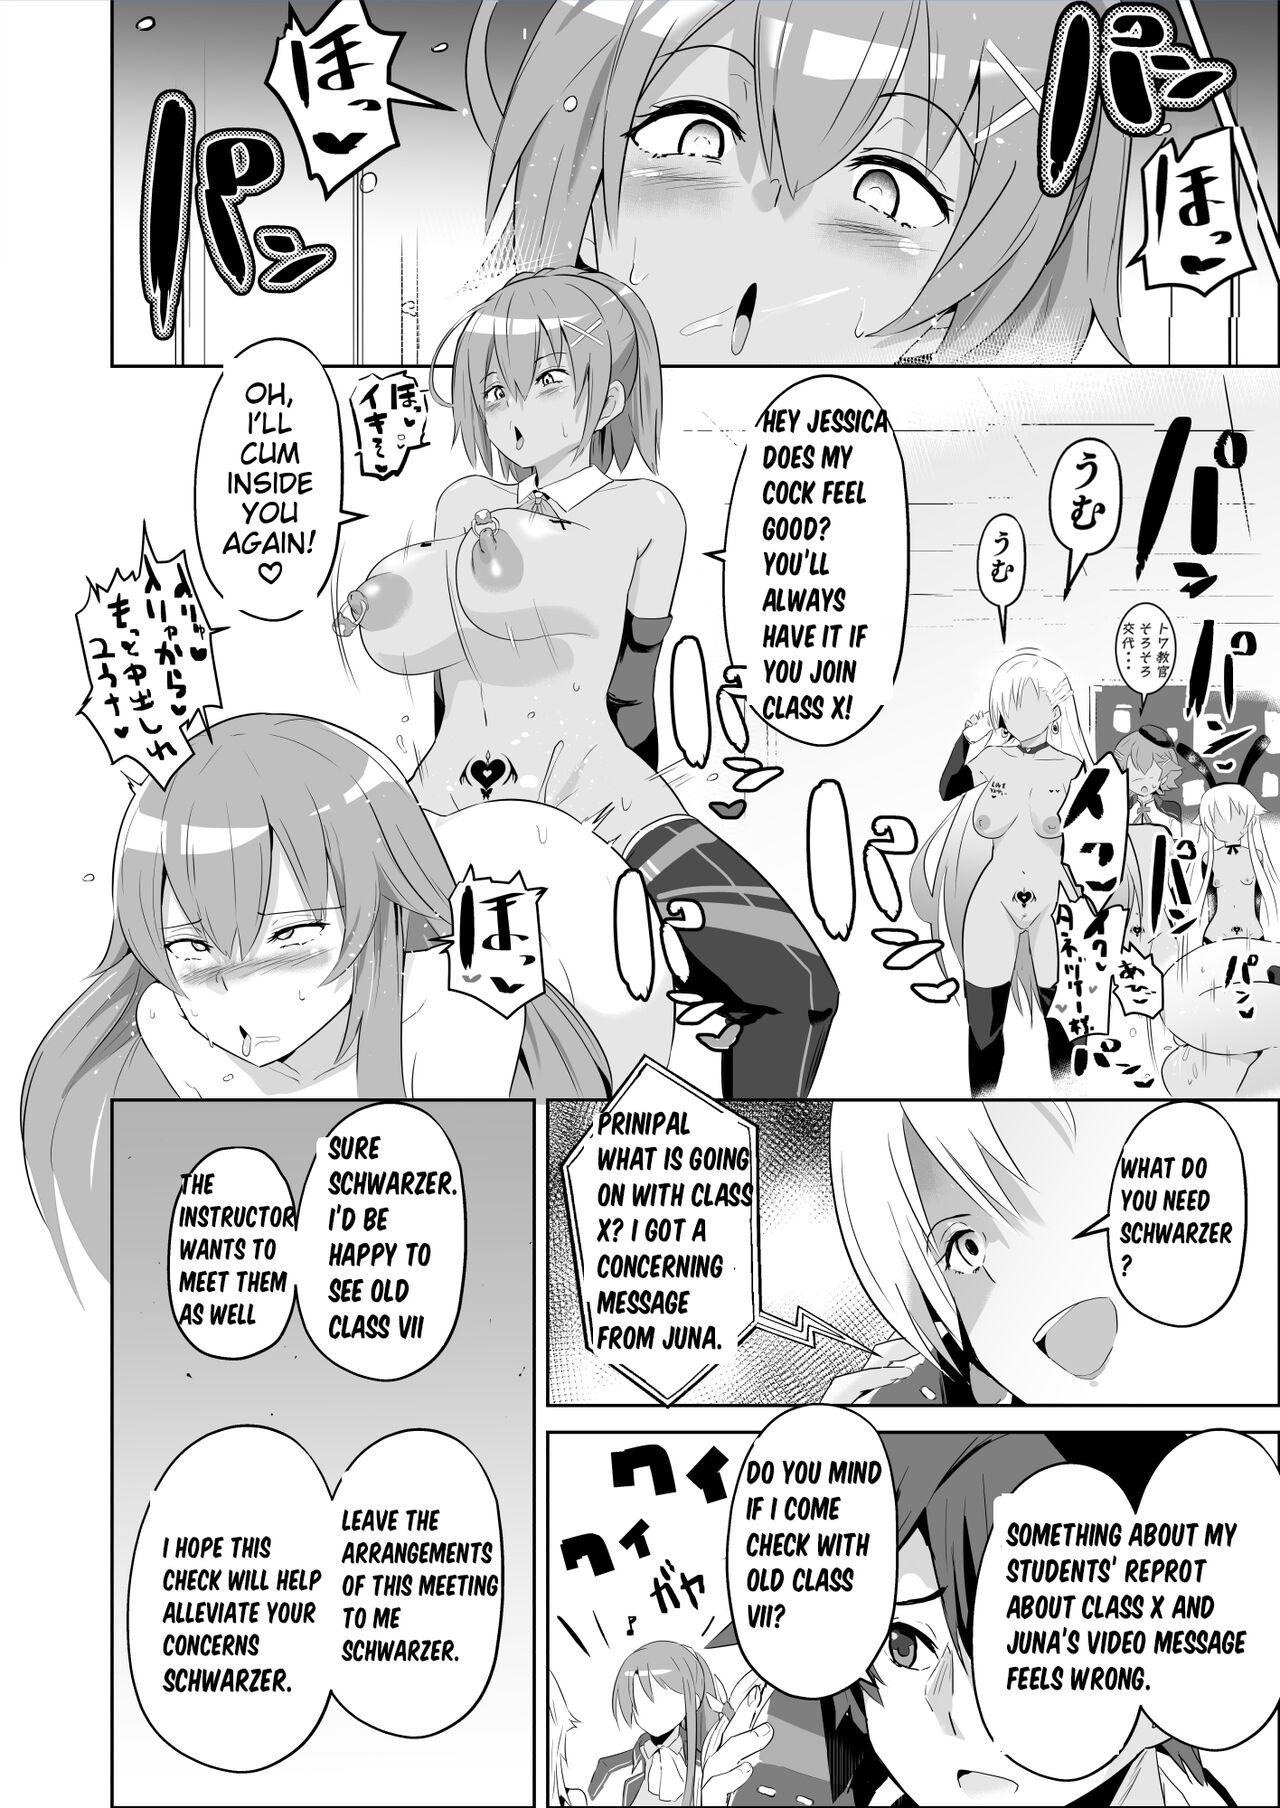 Cowgirl Hypnosis of the New Class VII - Aftermath - The legend of heroes | eiyuu densetsu Fetish - Page 2